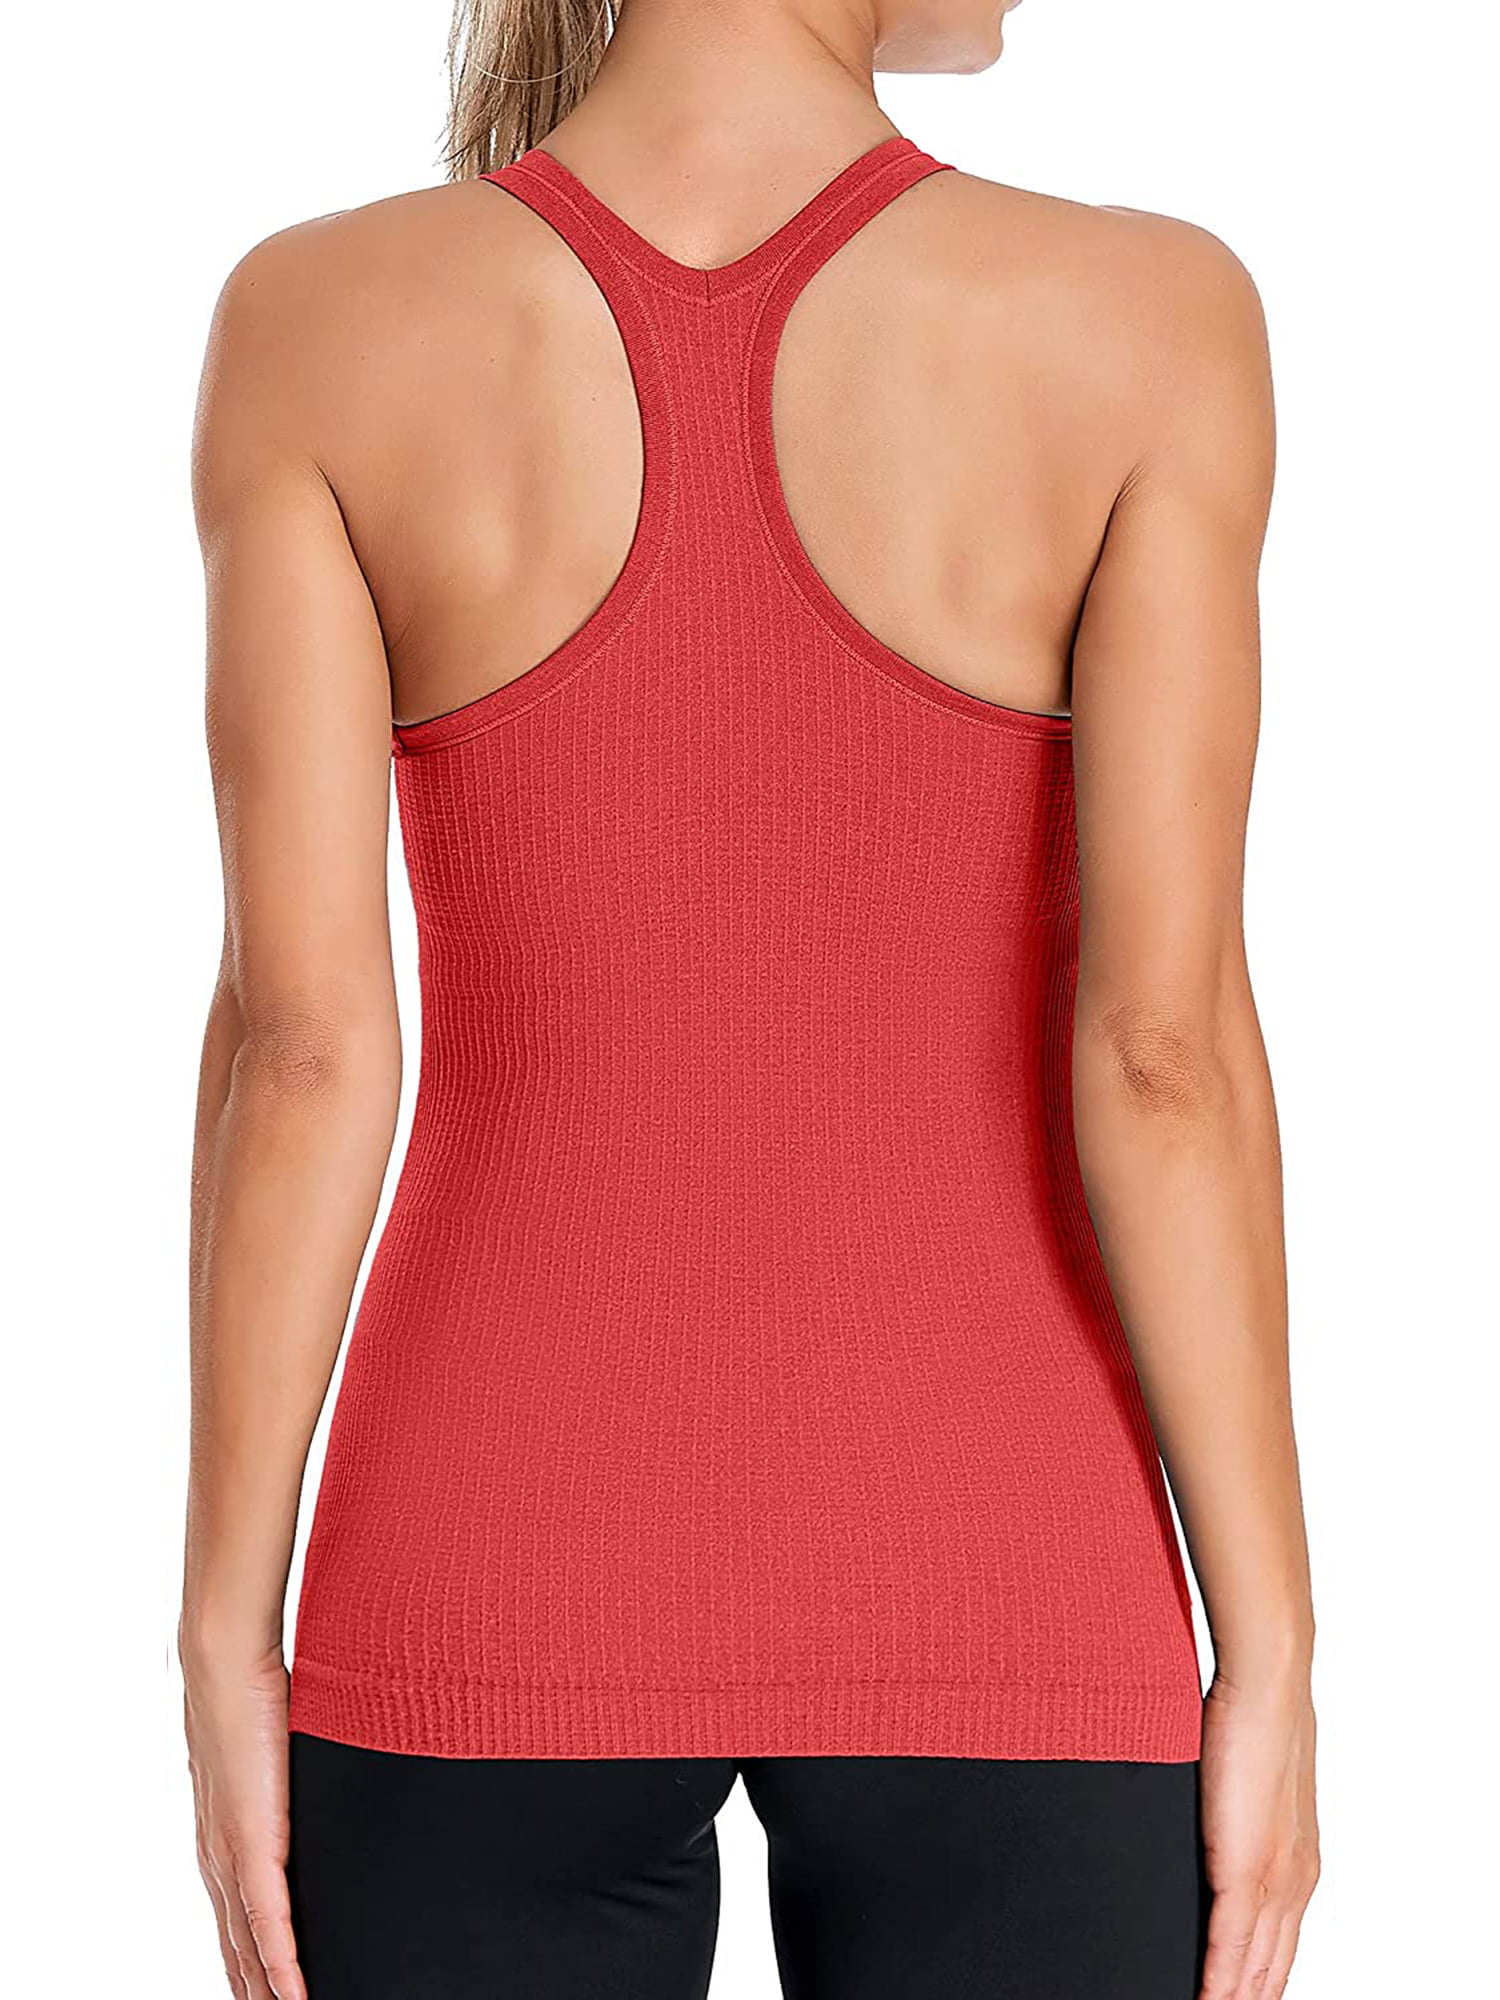 Terra Lifestyle Ribbed Racerback Tank Top for Women Workout Athletic  Athleisure